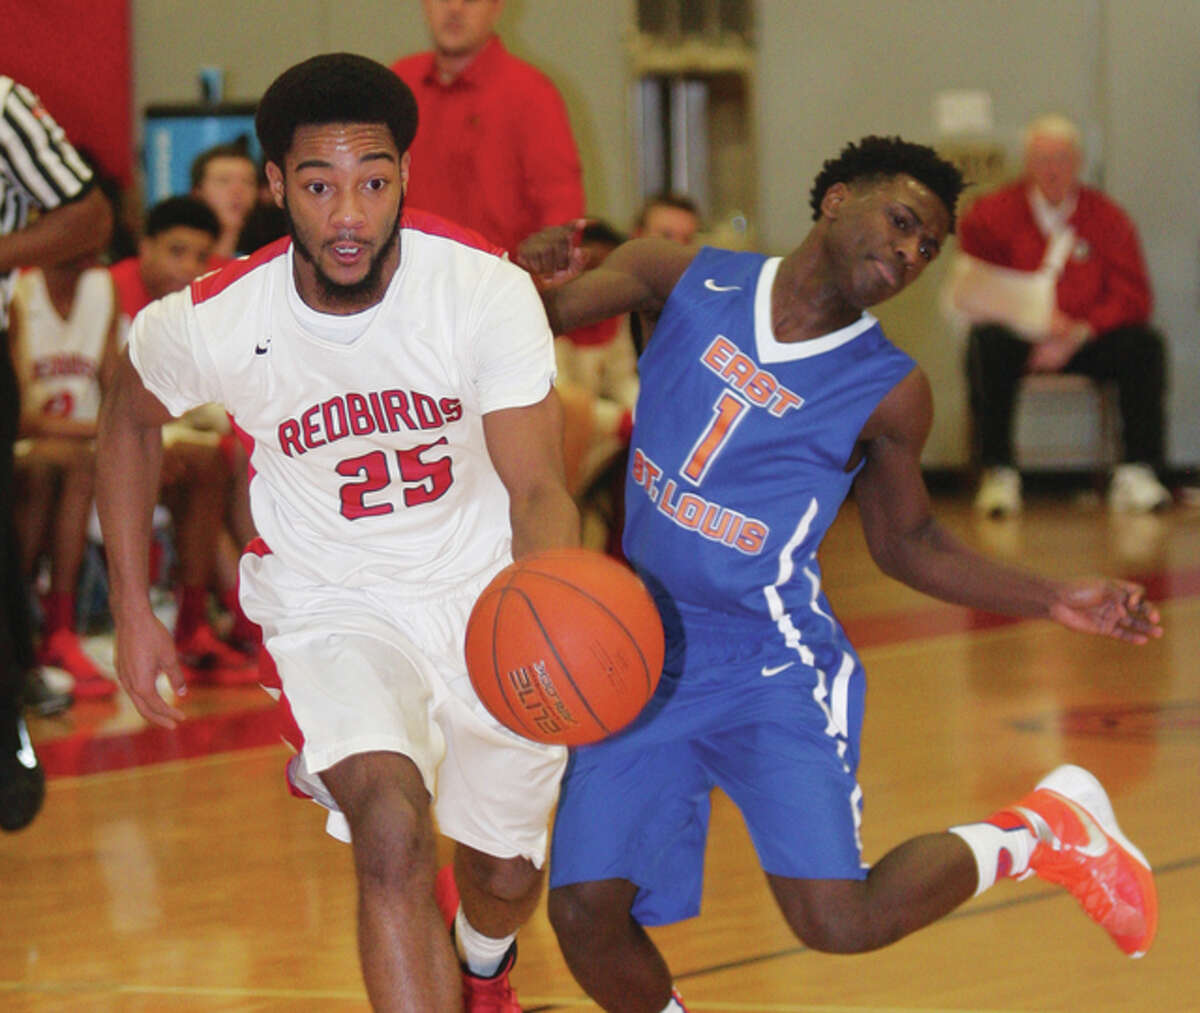 Alton’s Maurice Edwards(left) pushes past East St. Louis’ Kerion Chairs, who looks to avoid the foul as Edwards races upcourt on a Redbirds’ fast break Friday night at Alton High in Godfrey. Edwards scored 26 points in Alton’s Southwestern Conference victory.